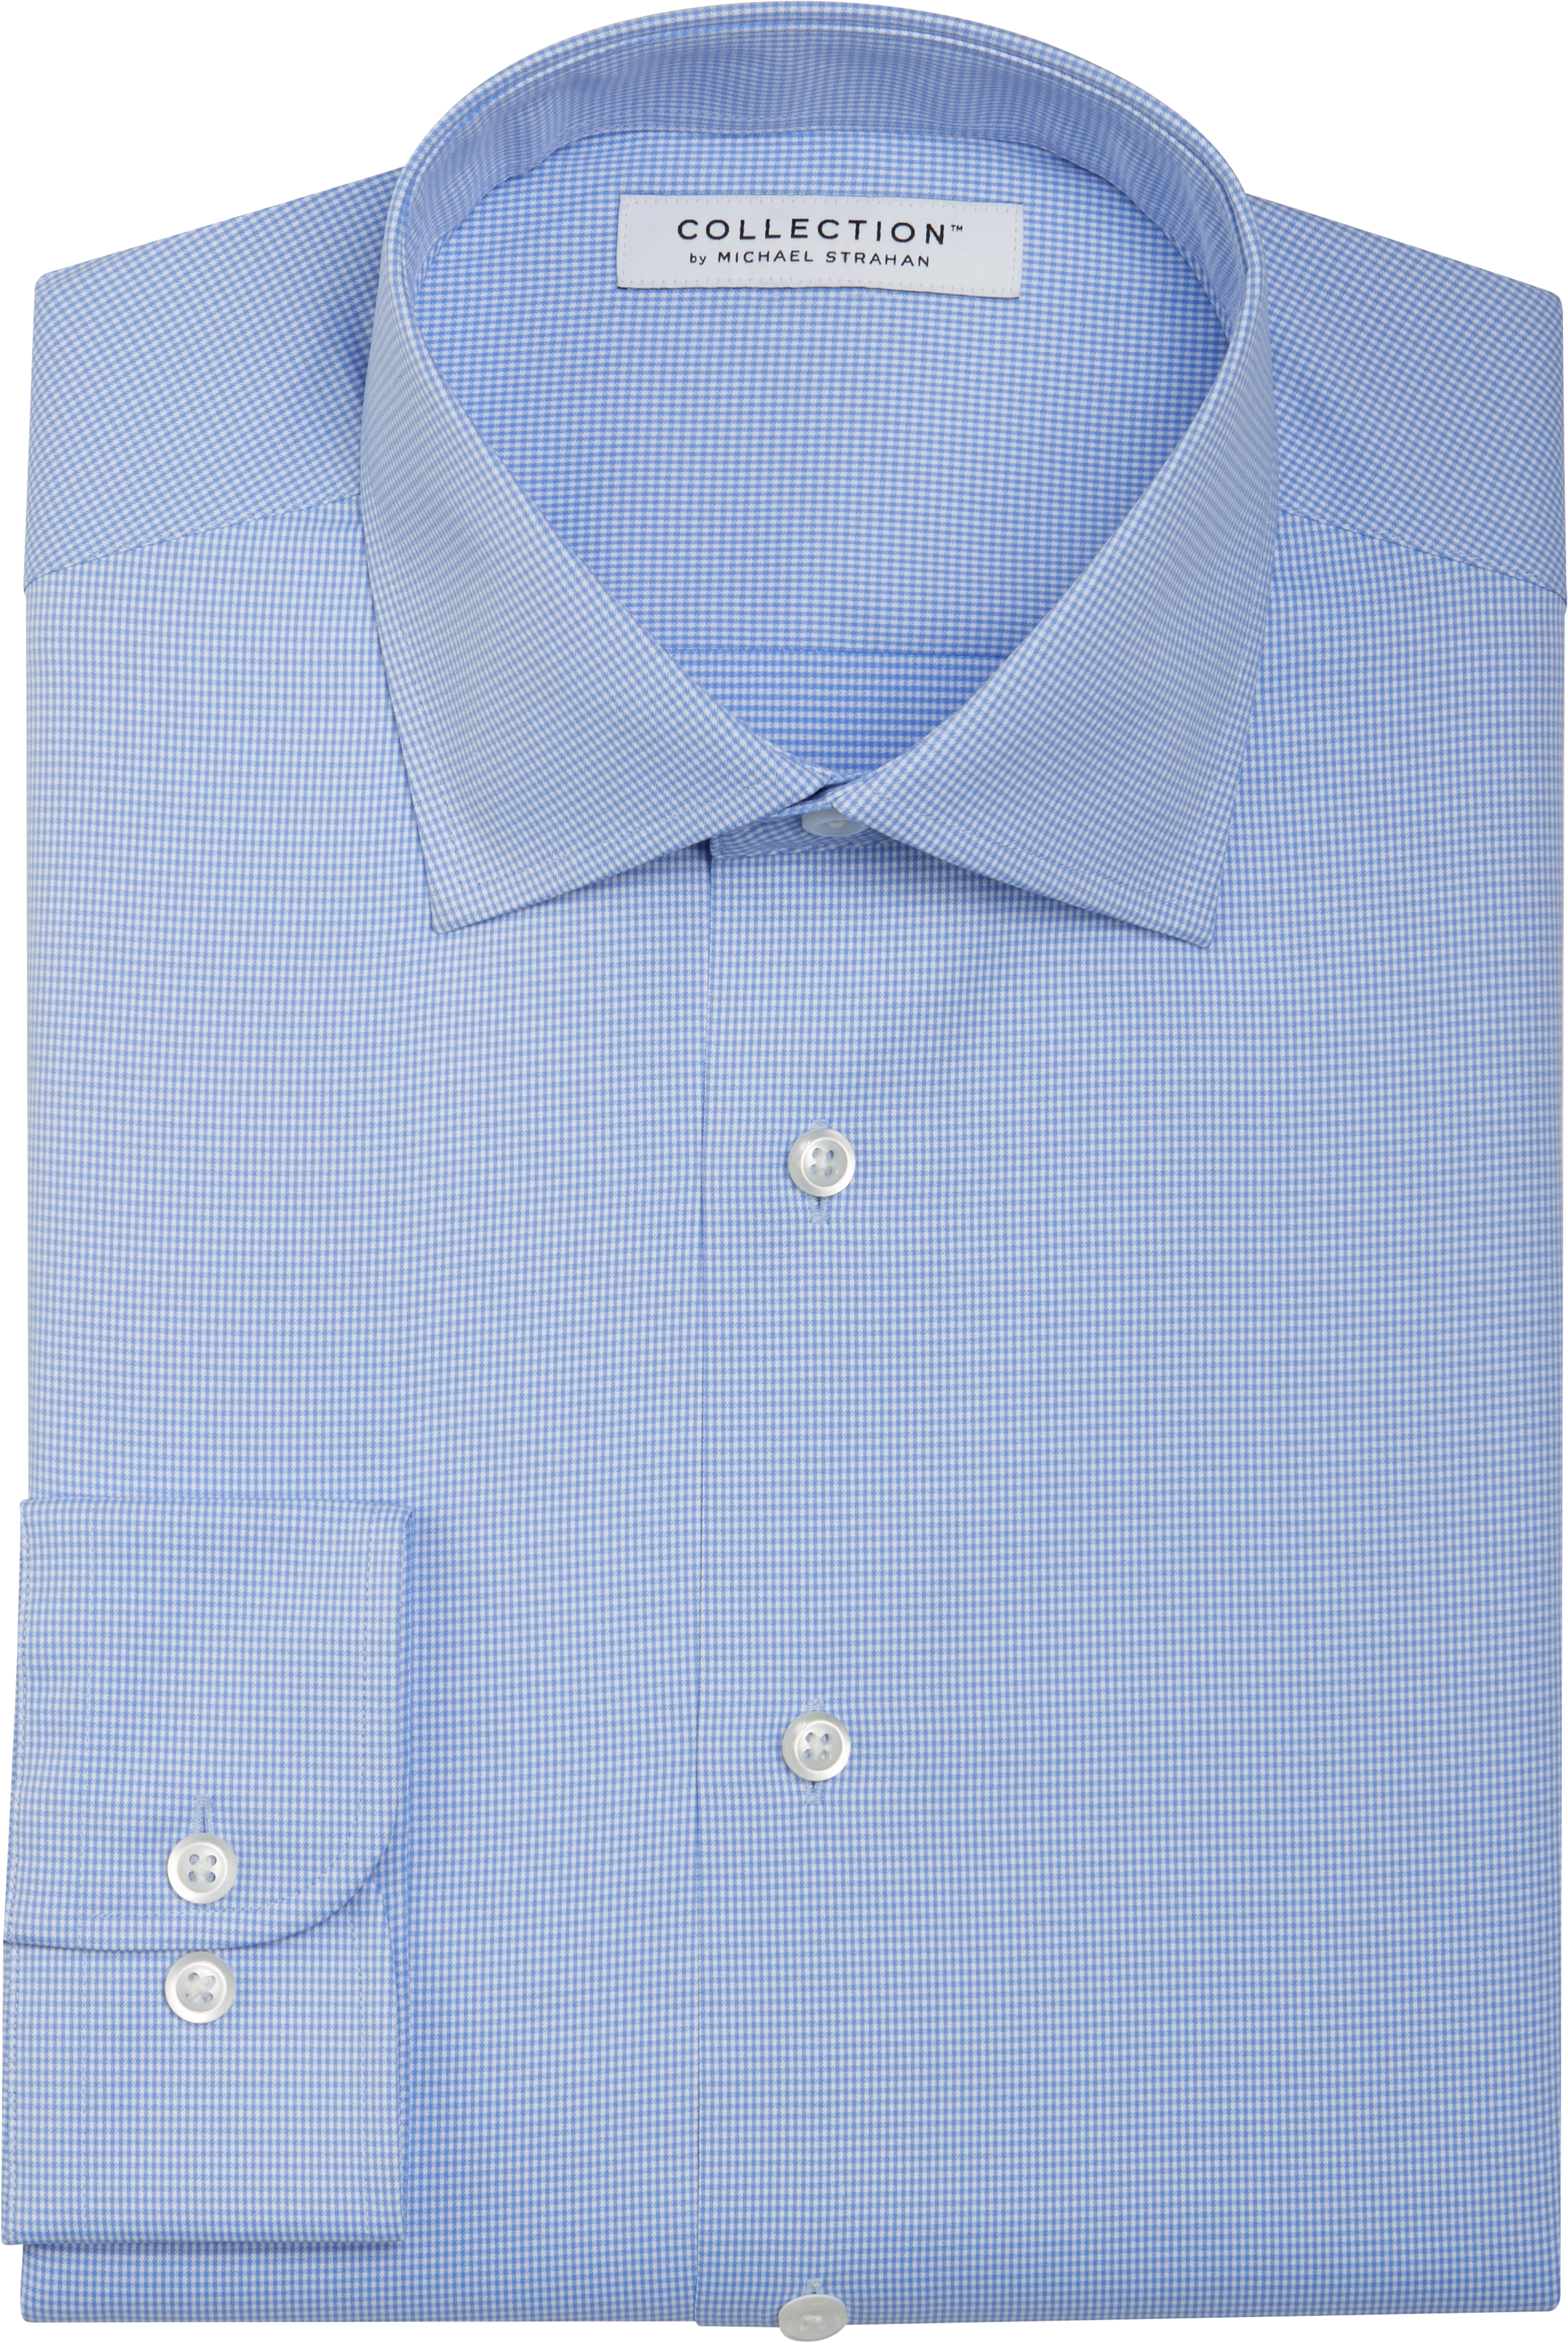 Collection By Michael Strahan Active Wear Classic Fit Dress Shirt, Blue ...